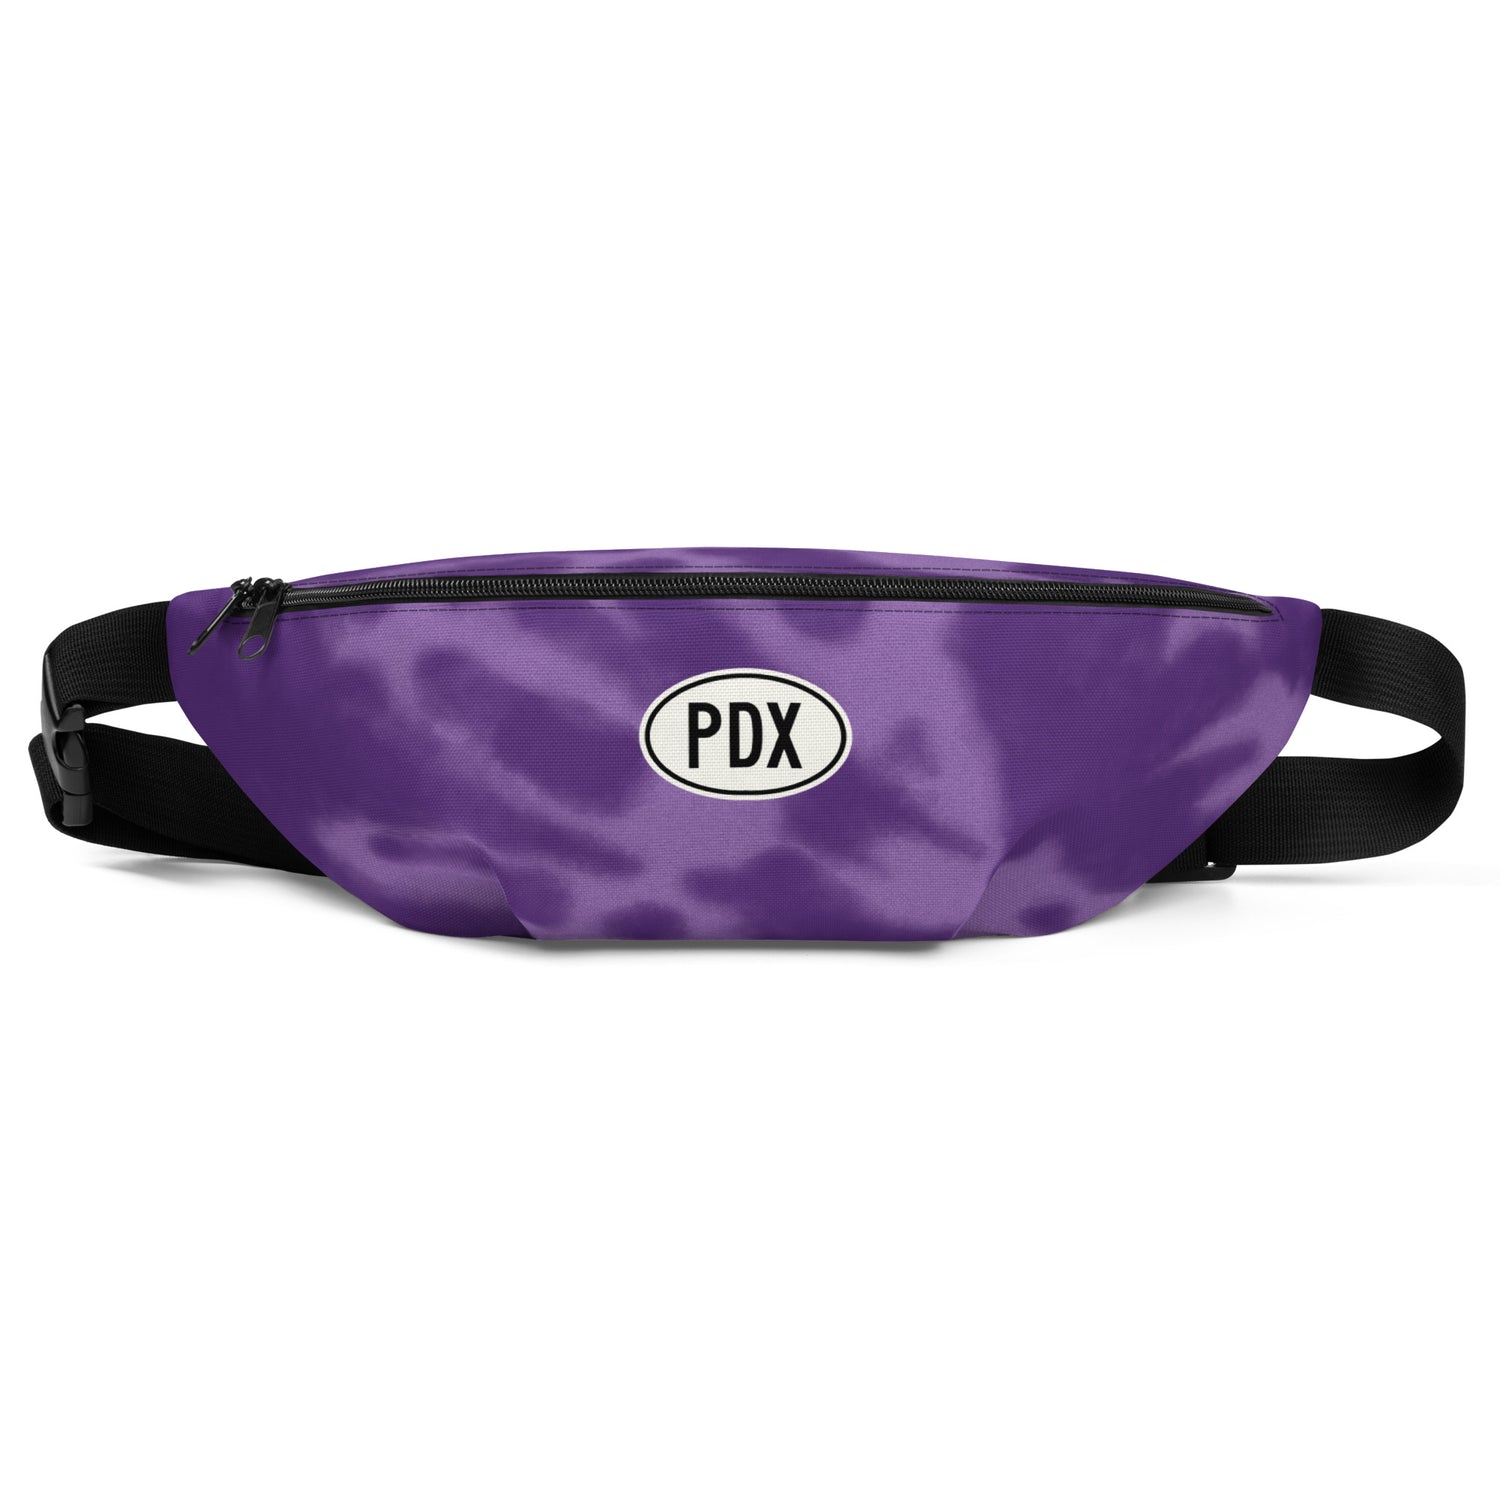 Portland Oregon Backpacks, Fanny Packs and Tote Bags • PDX Airport Code